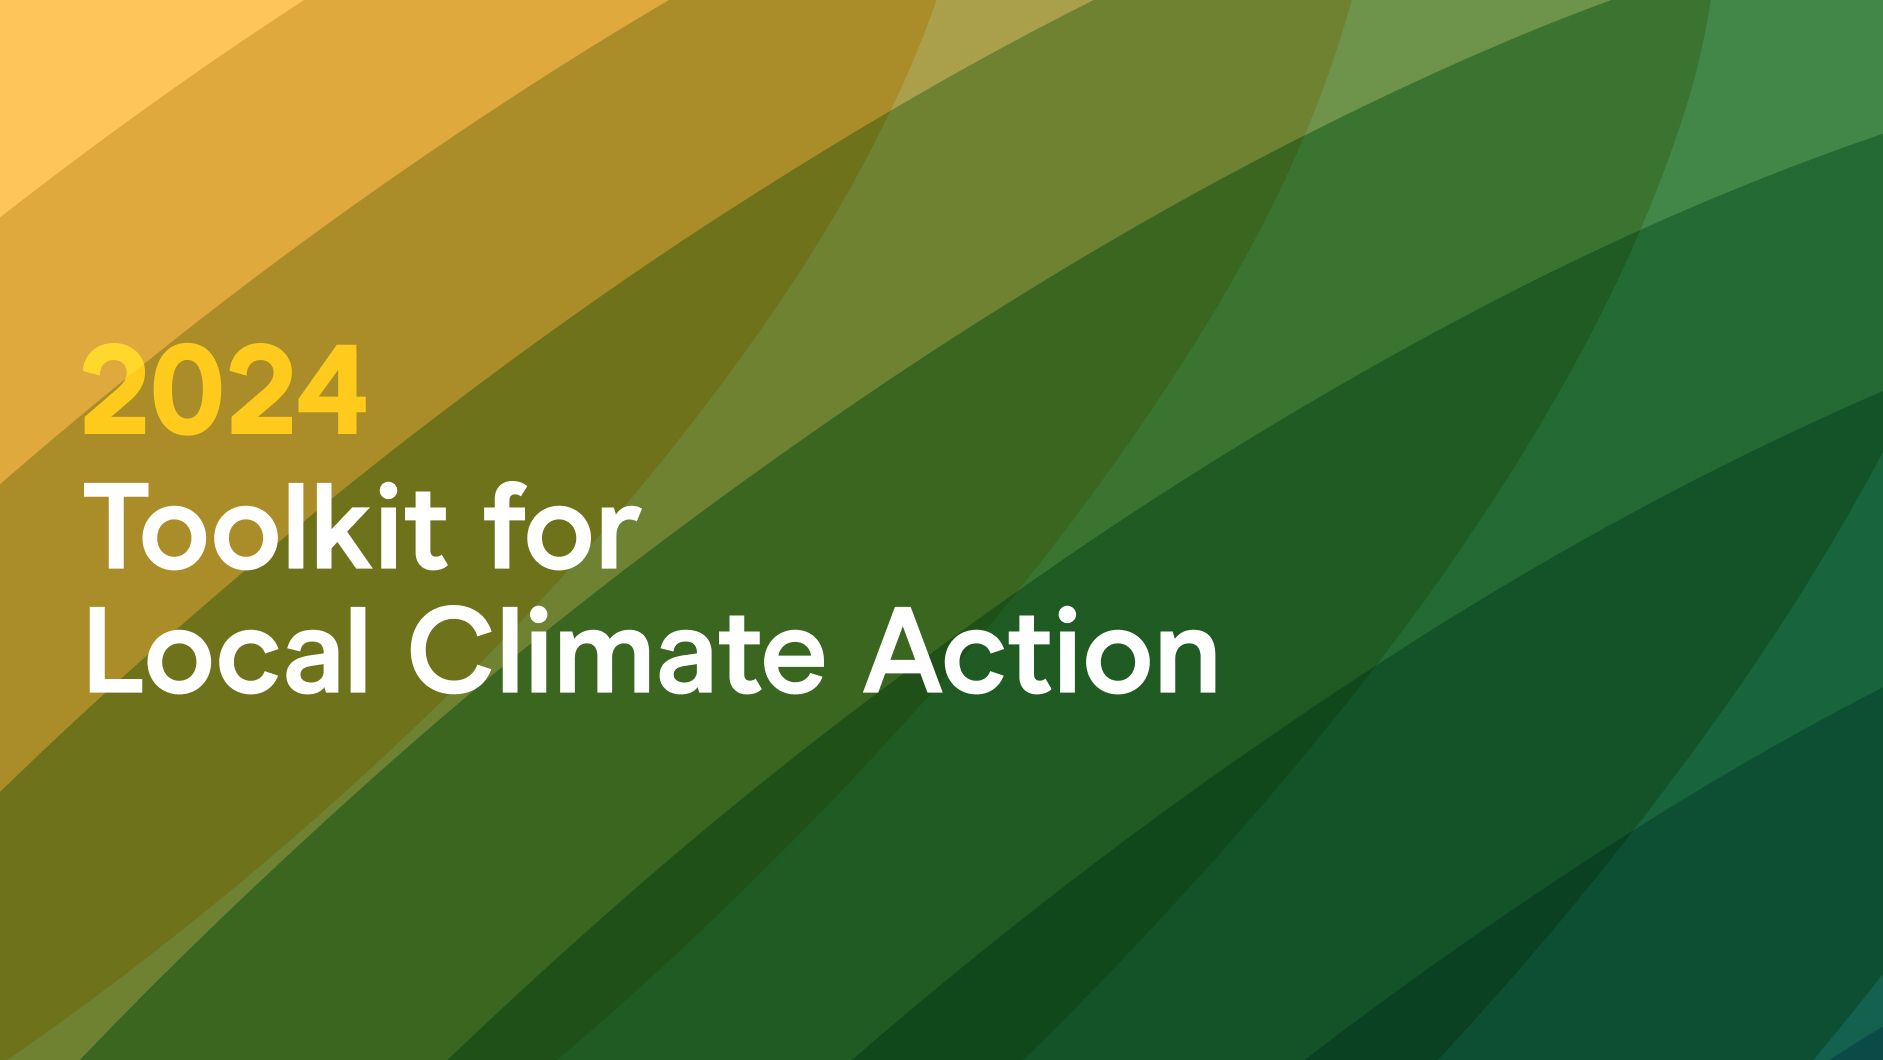 2024 Toolkit for Local Climate Action